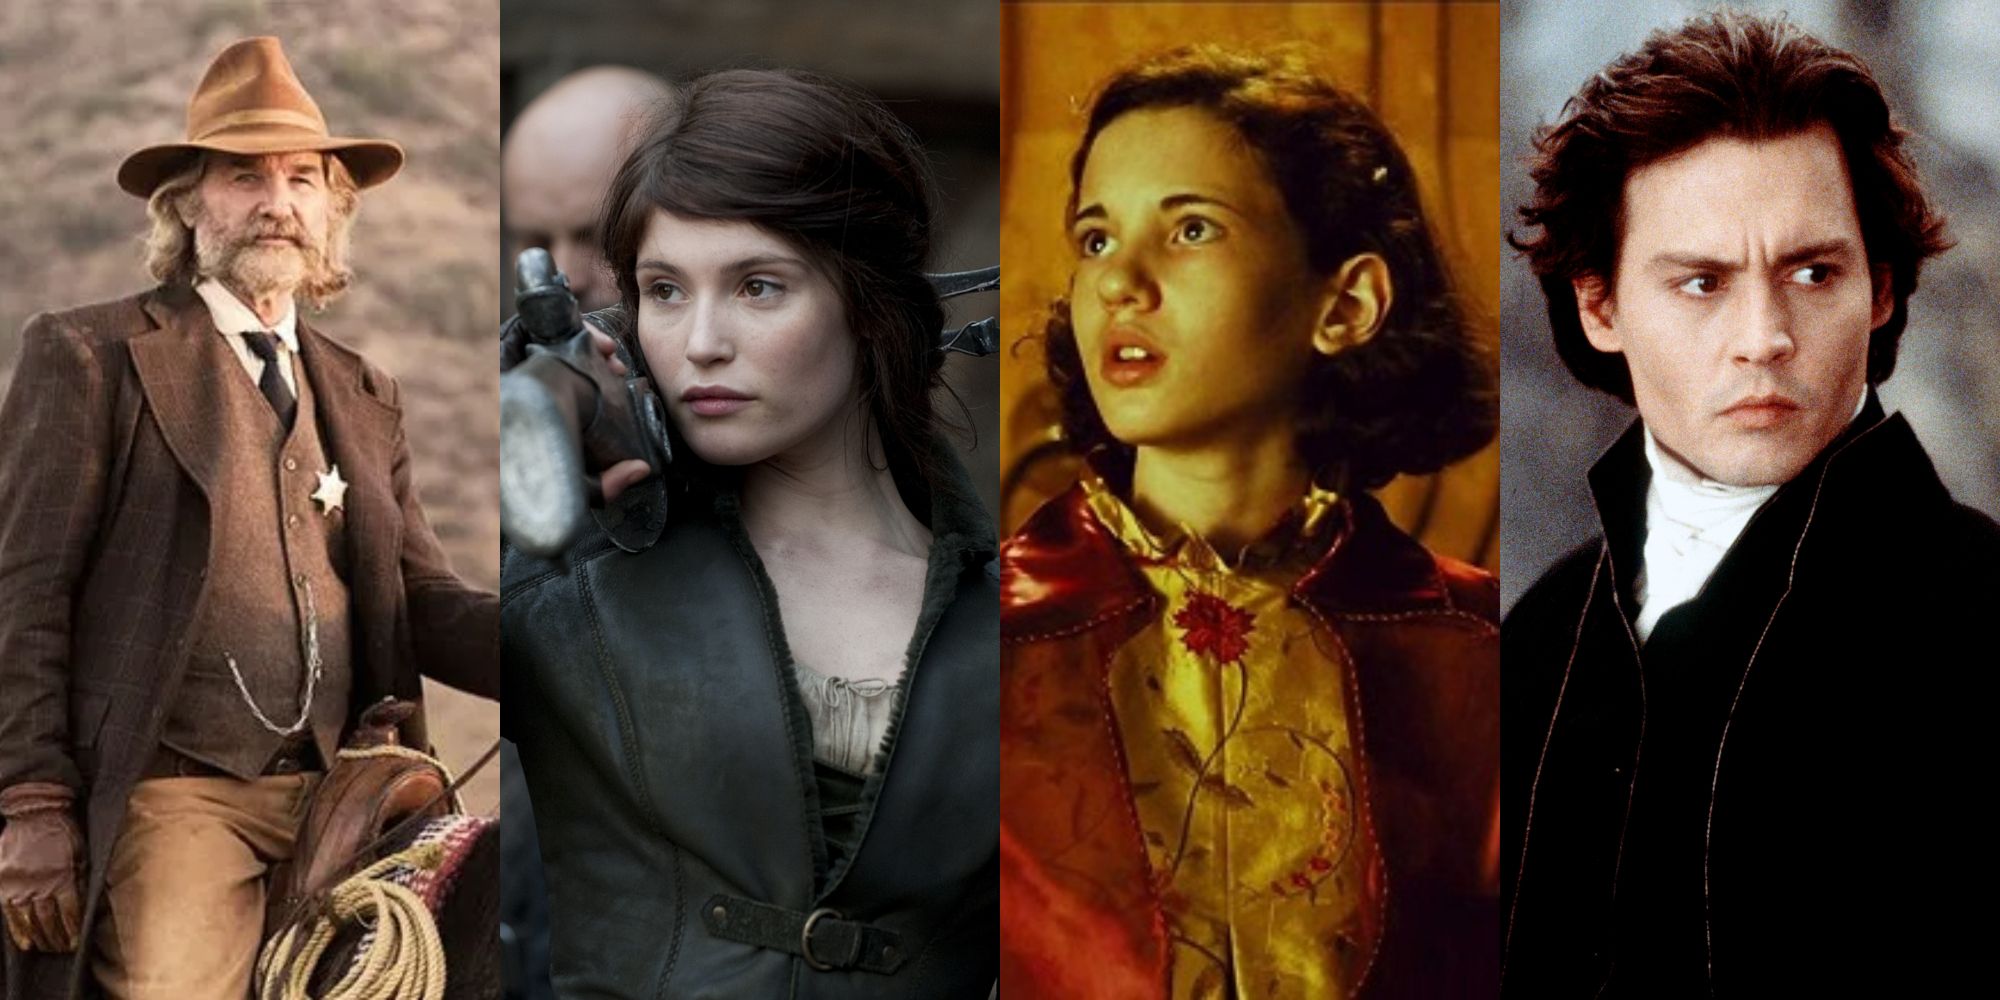 Bone Tomahawk, Hansel and Gretel: Witch Hunters, Pan's Labyrinth, and Sleepy Hollow